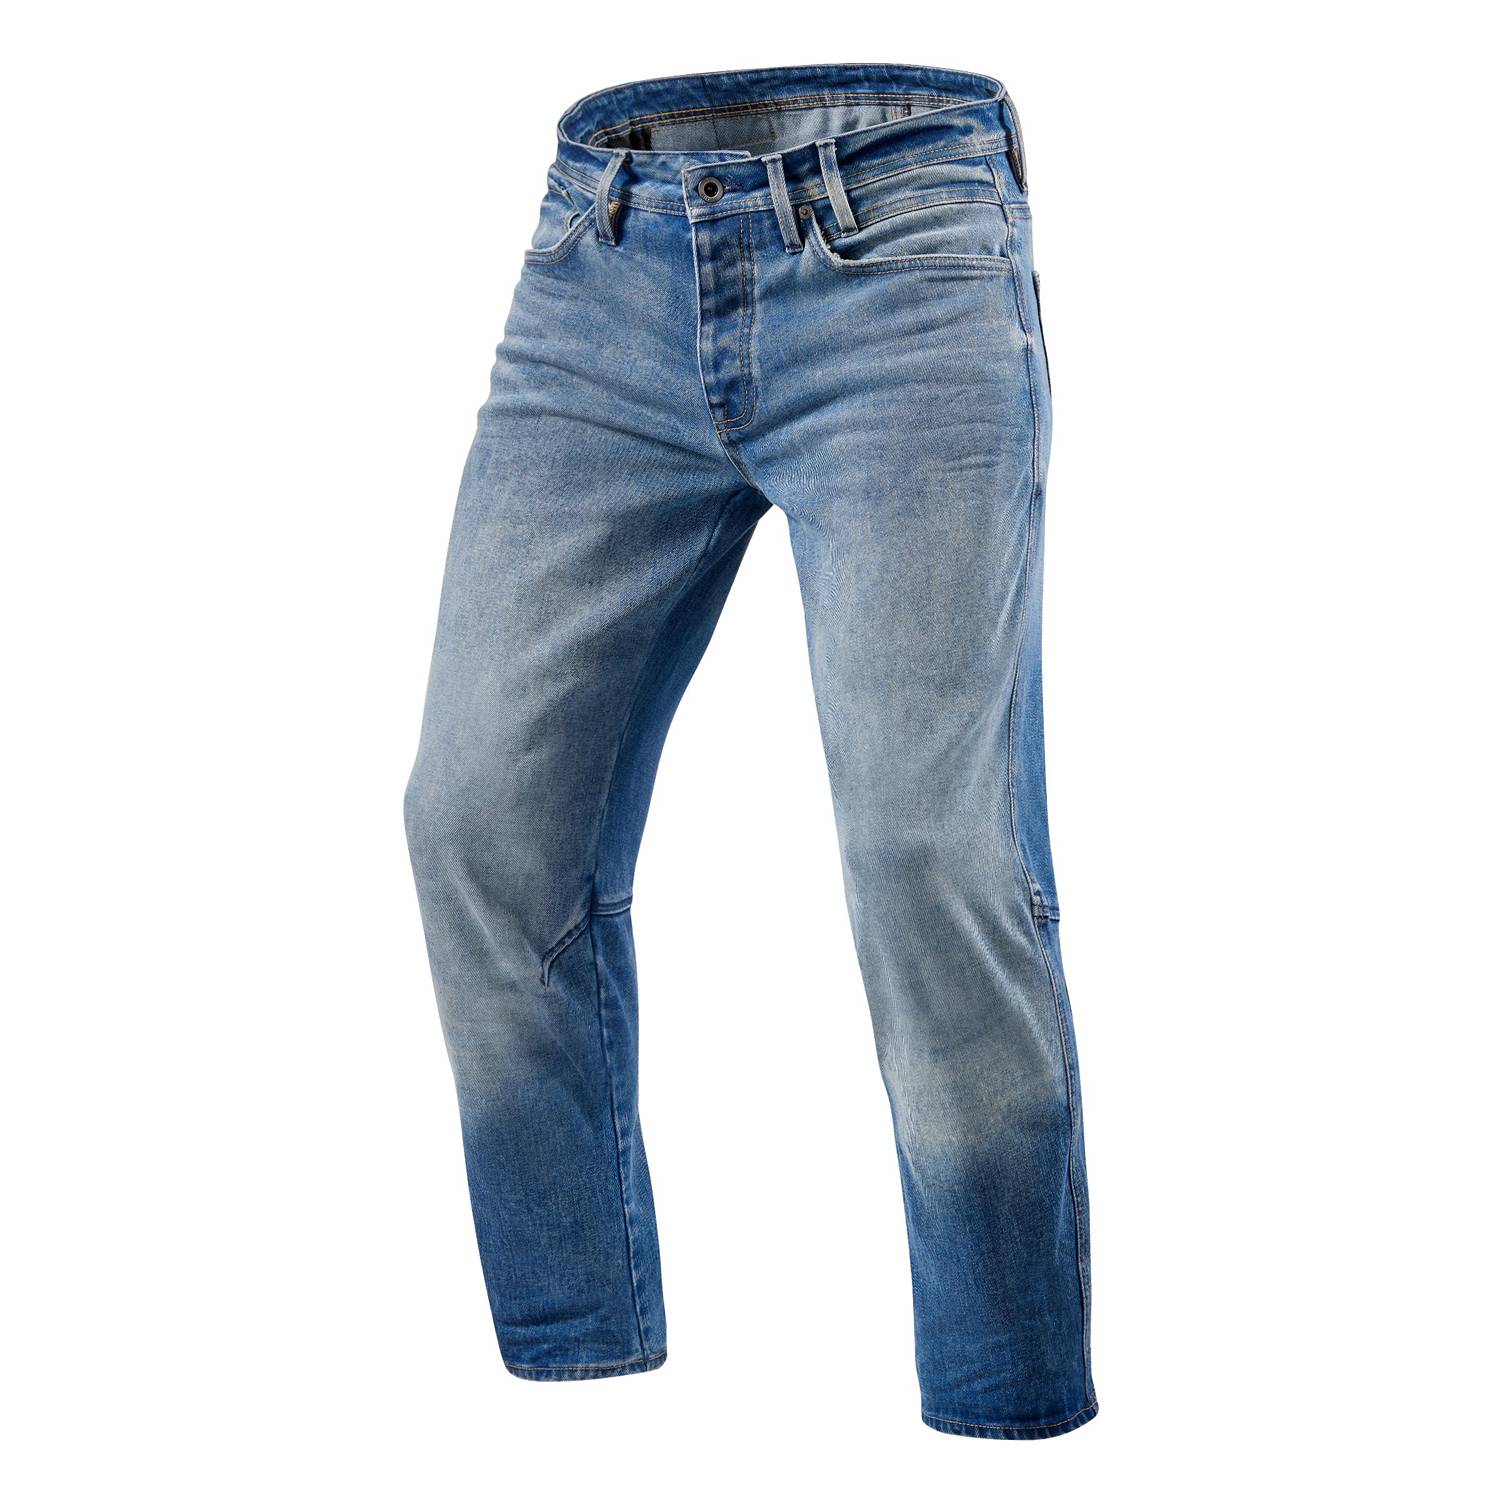 Image of REV'IT! Salt TF Mid Blue Used Motorcycle Jeans Talla L36/W33